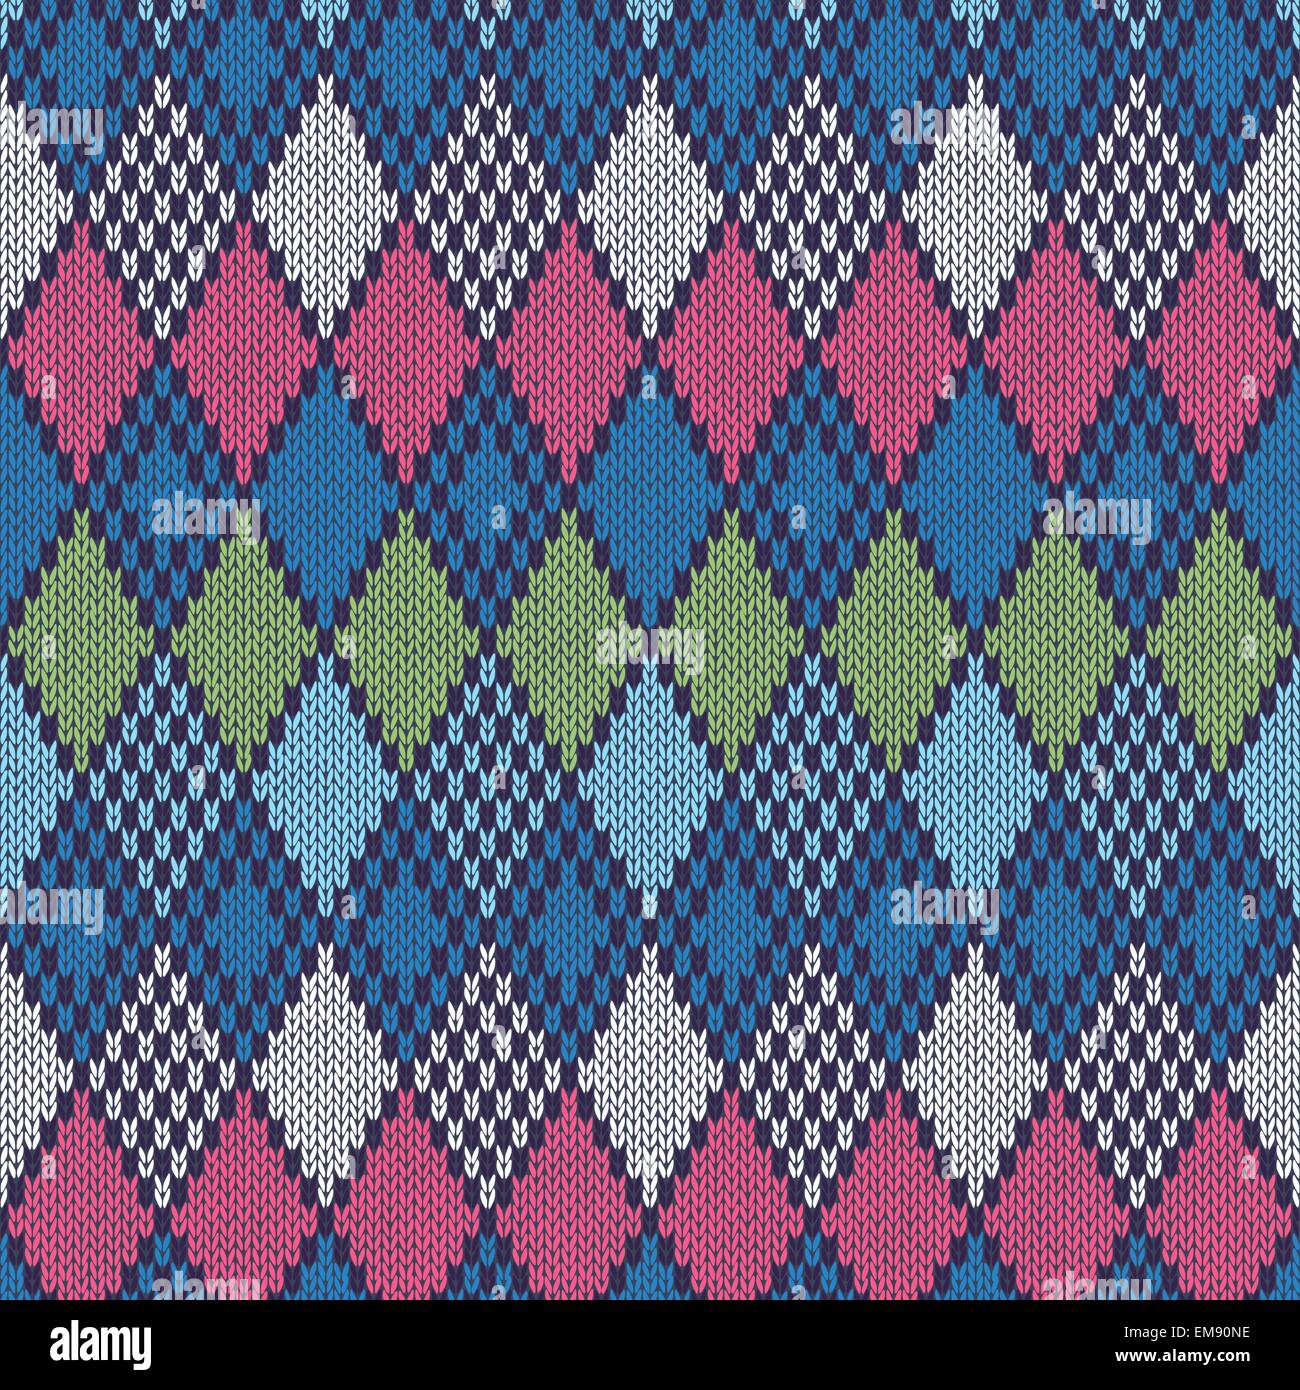 Ethnic Style Seamless Knitted Pattern Stock Vector